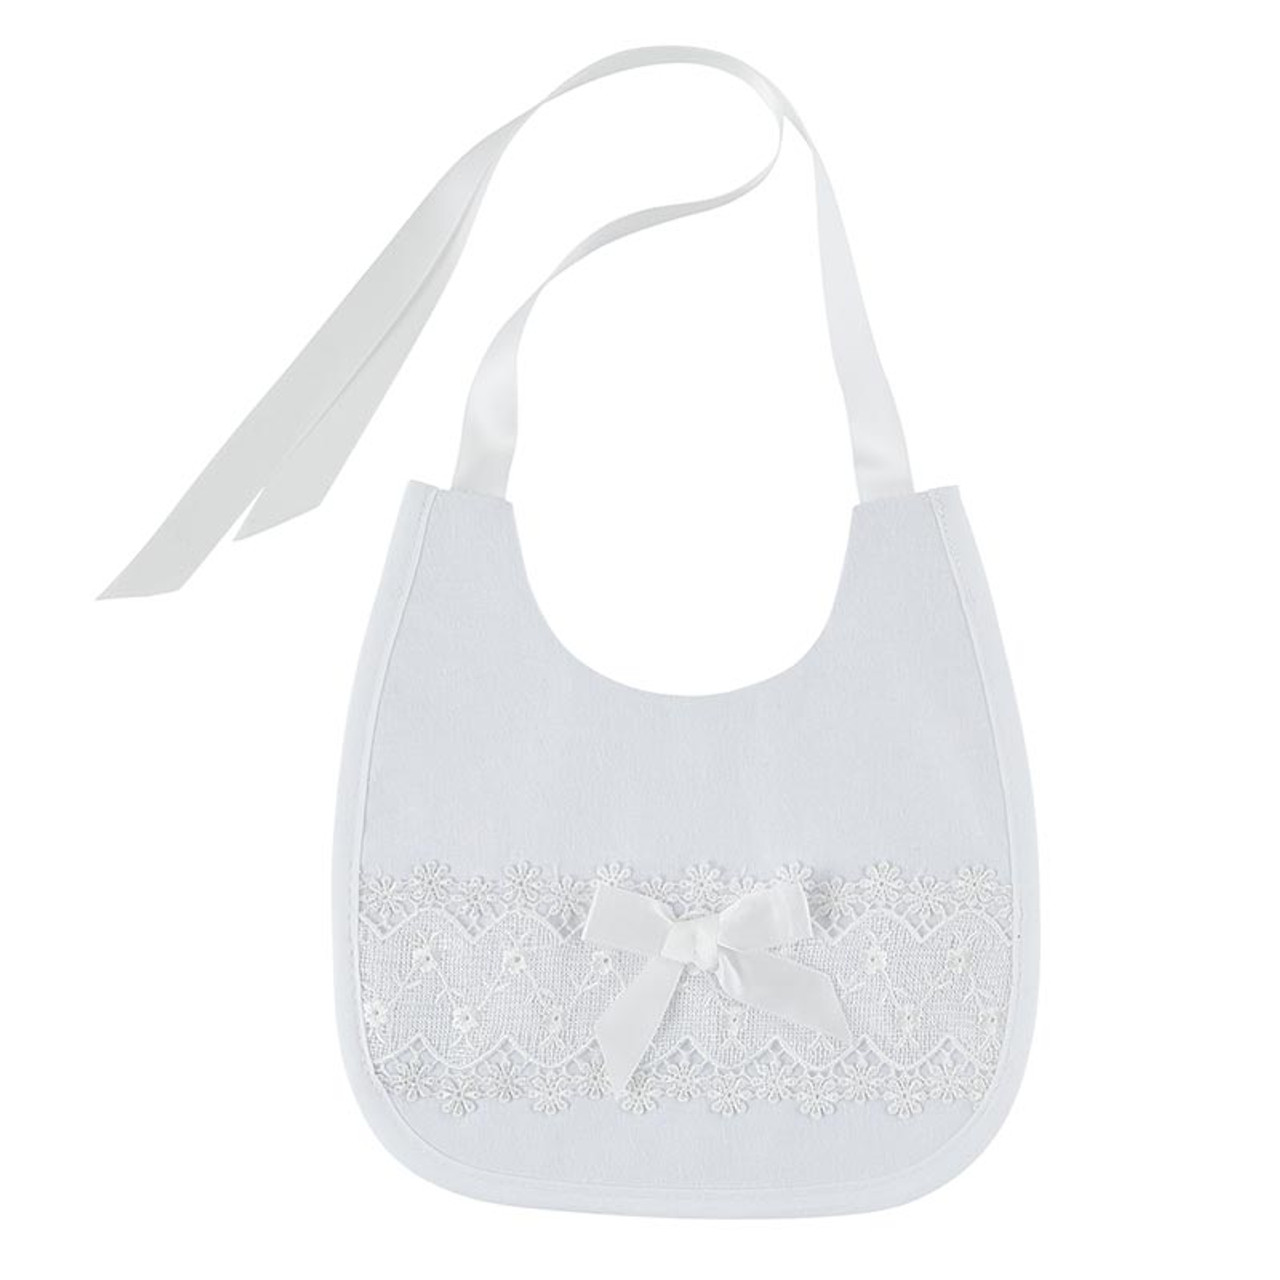 Child Baptism Bib with Lace #N1904, 4 Pieces - McKay Church Goods